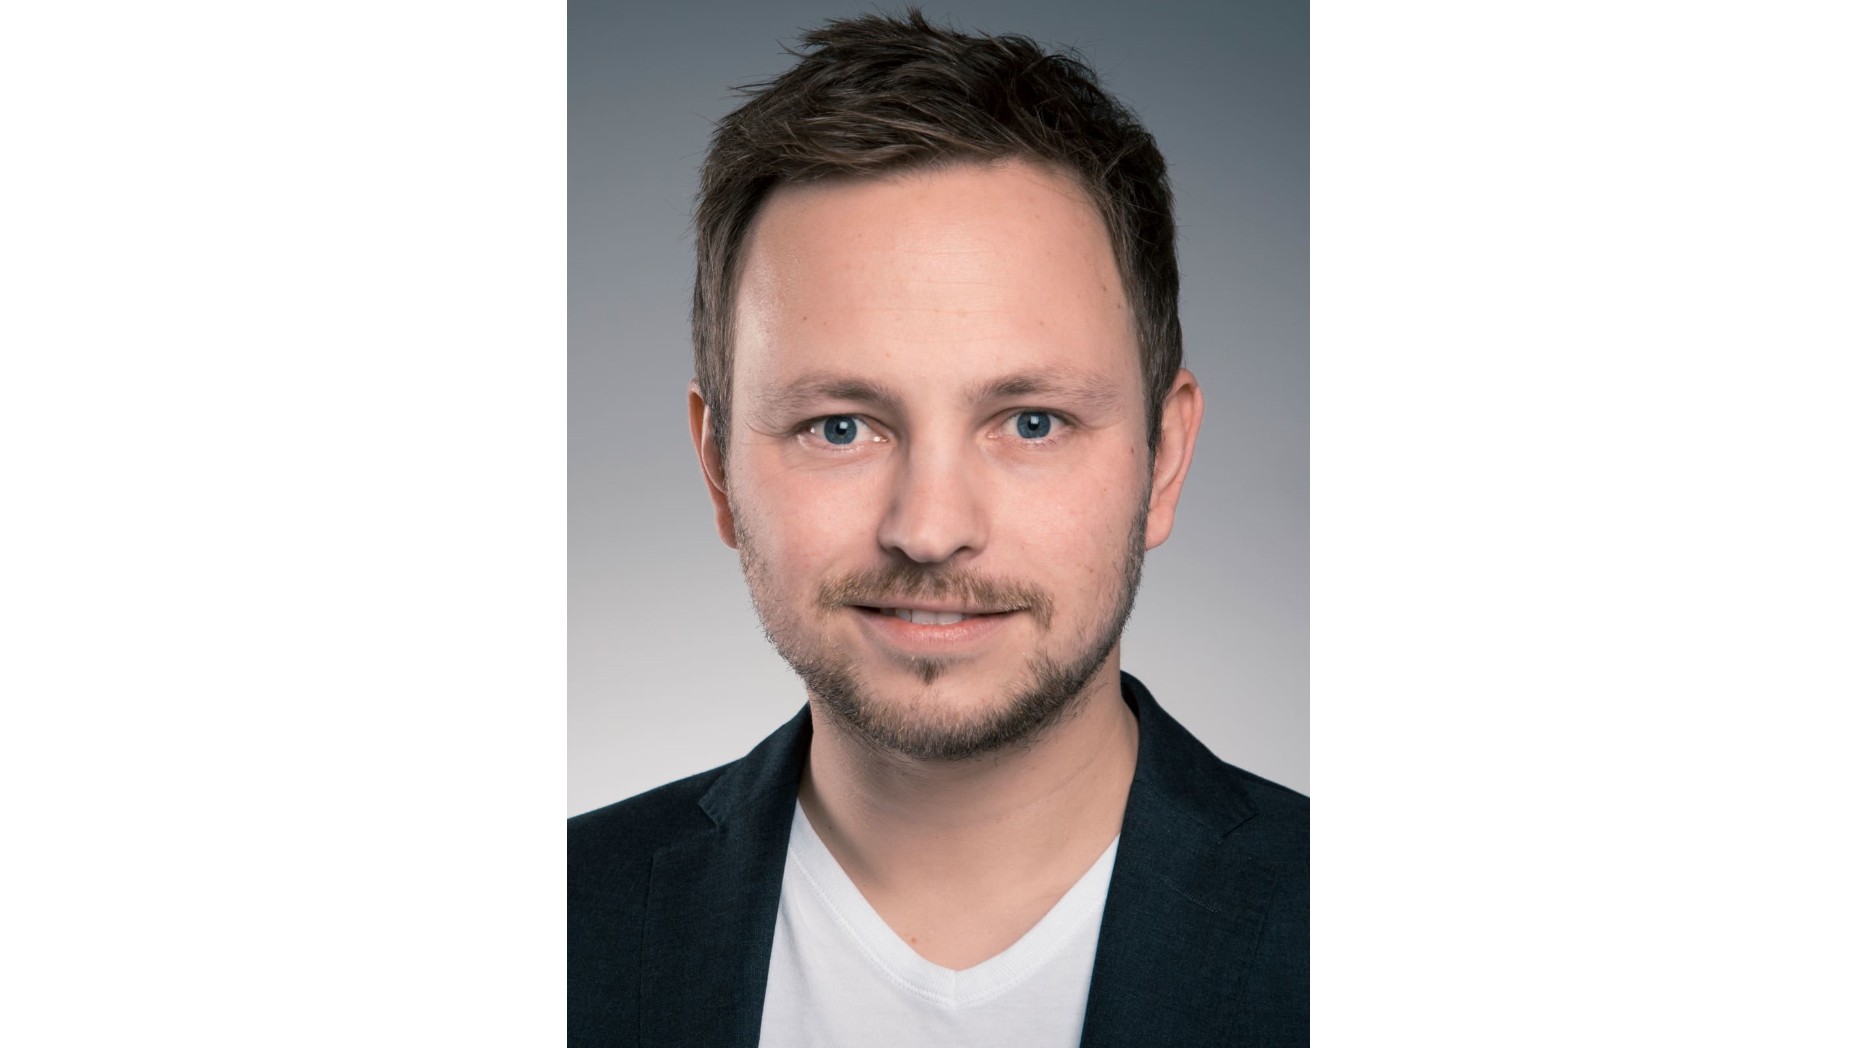 Uli Zimmermann, Founder and Managing Director of the online marketing agency eMinded GmbH